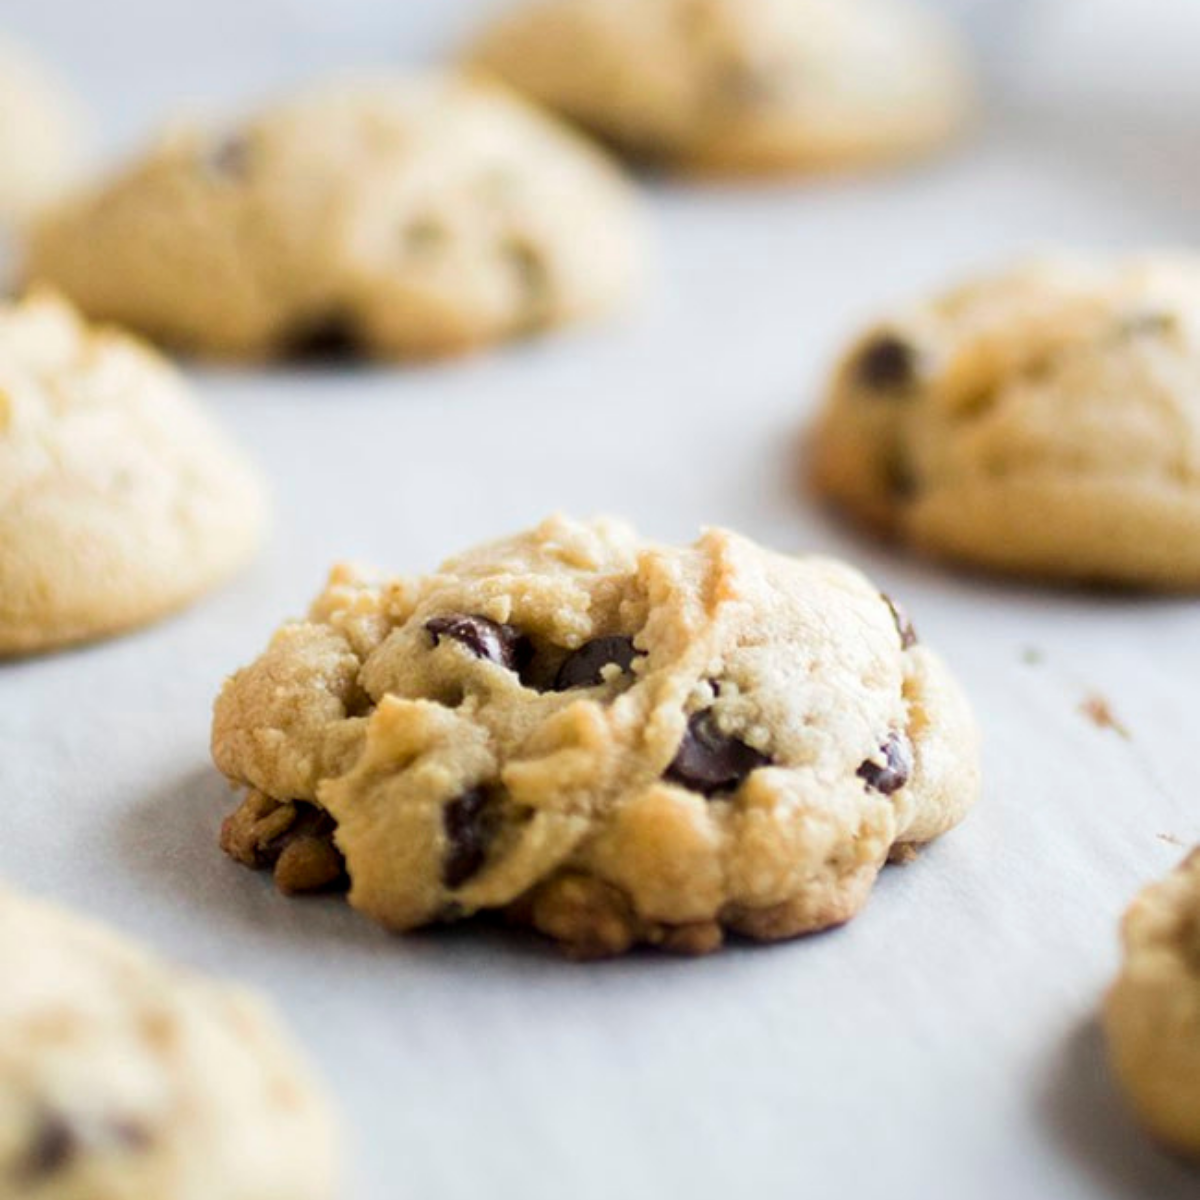 Chocolate chip cookies on a parchment paper lined baking sheet.